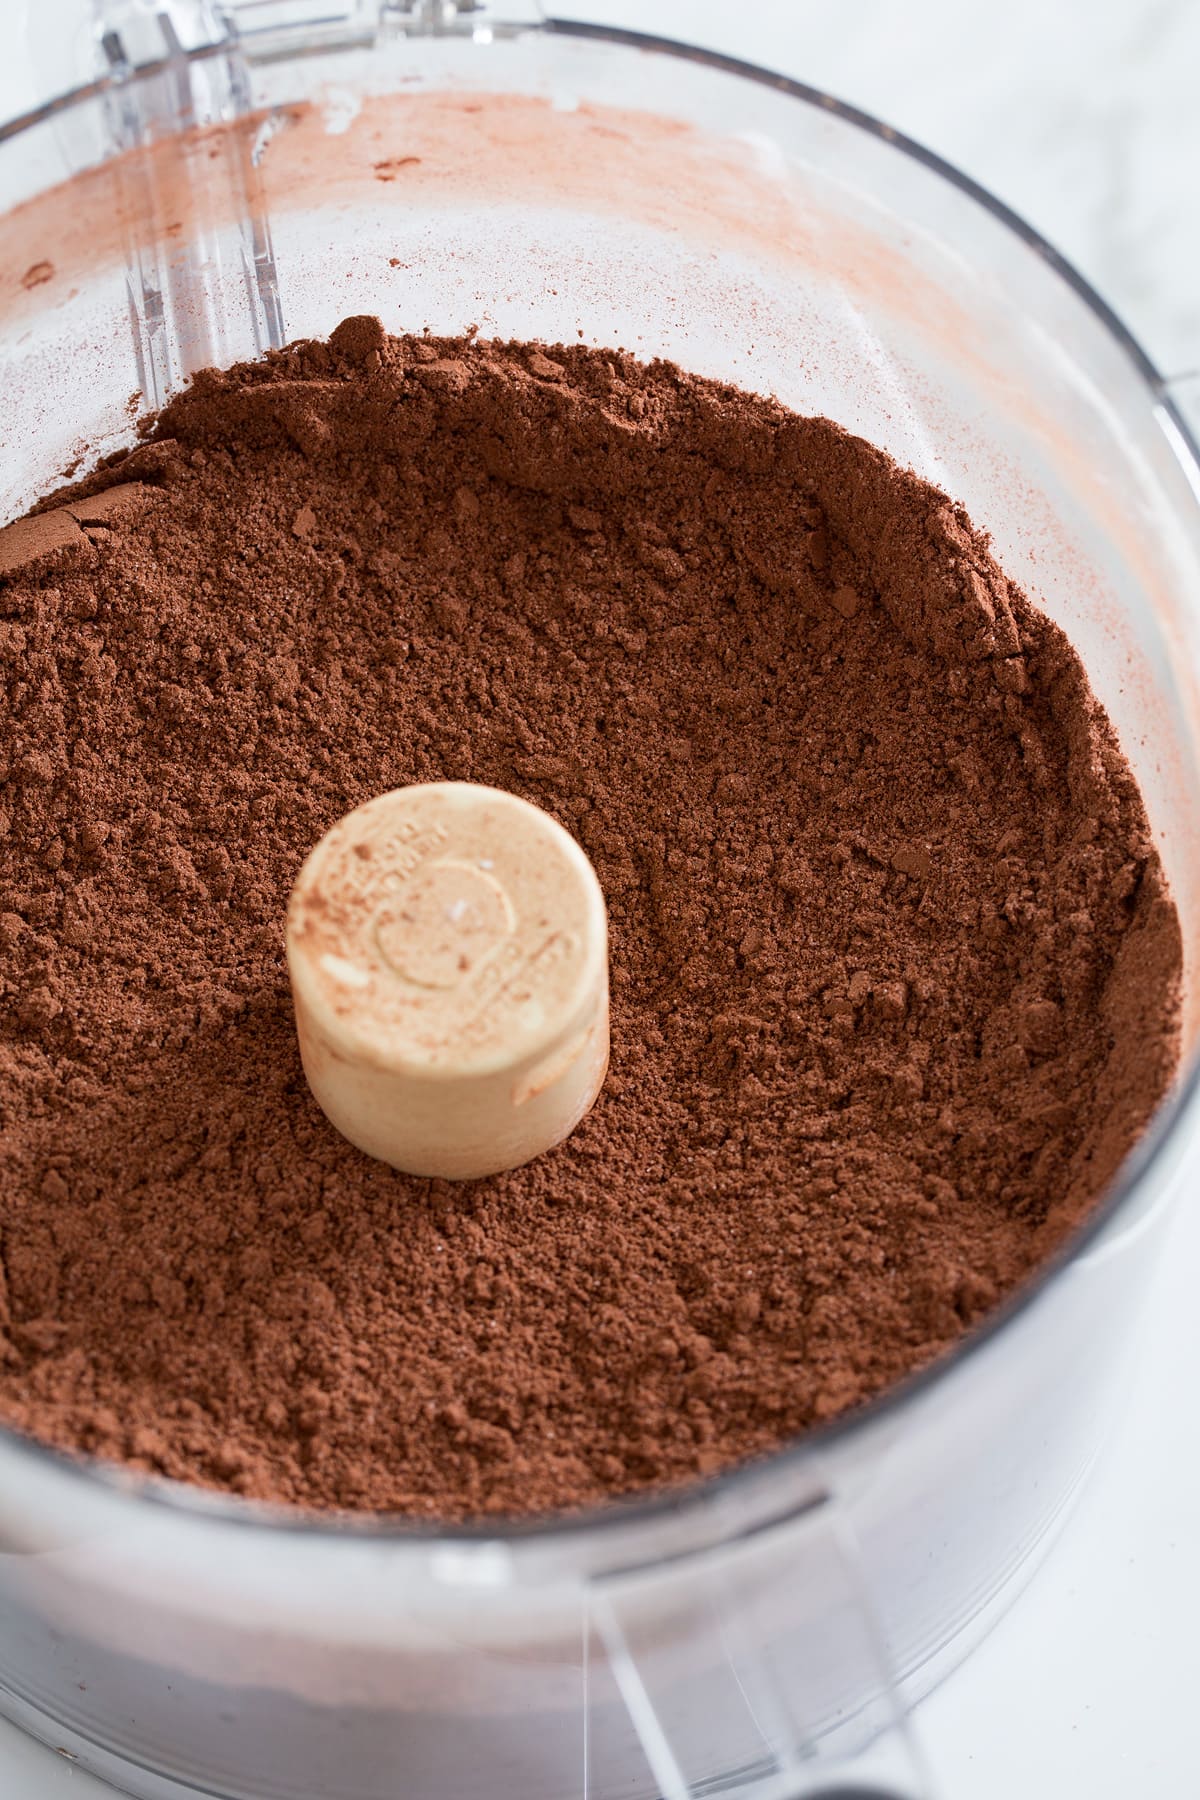 Homemade hot chocolate mix in food processor after blending.